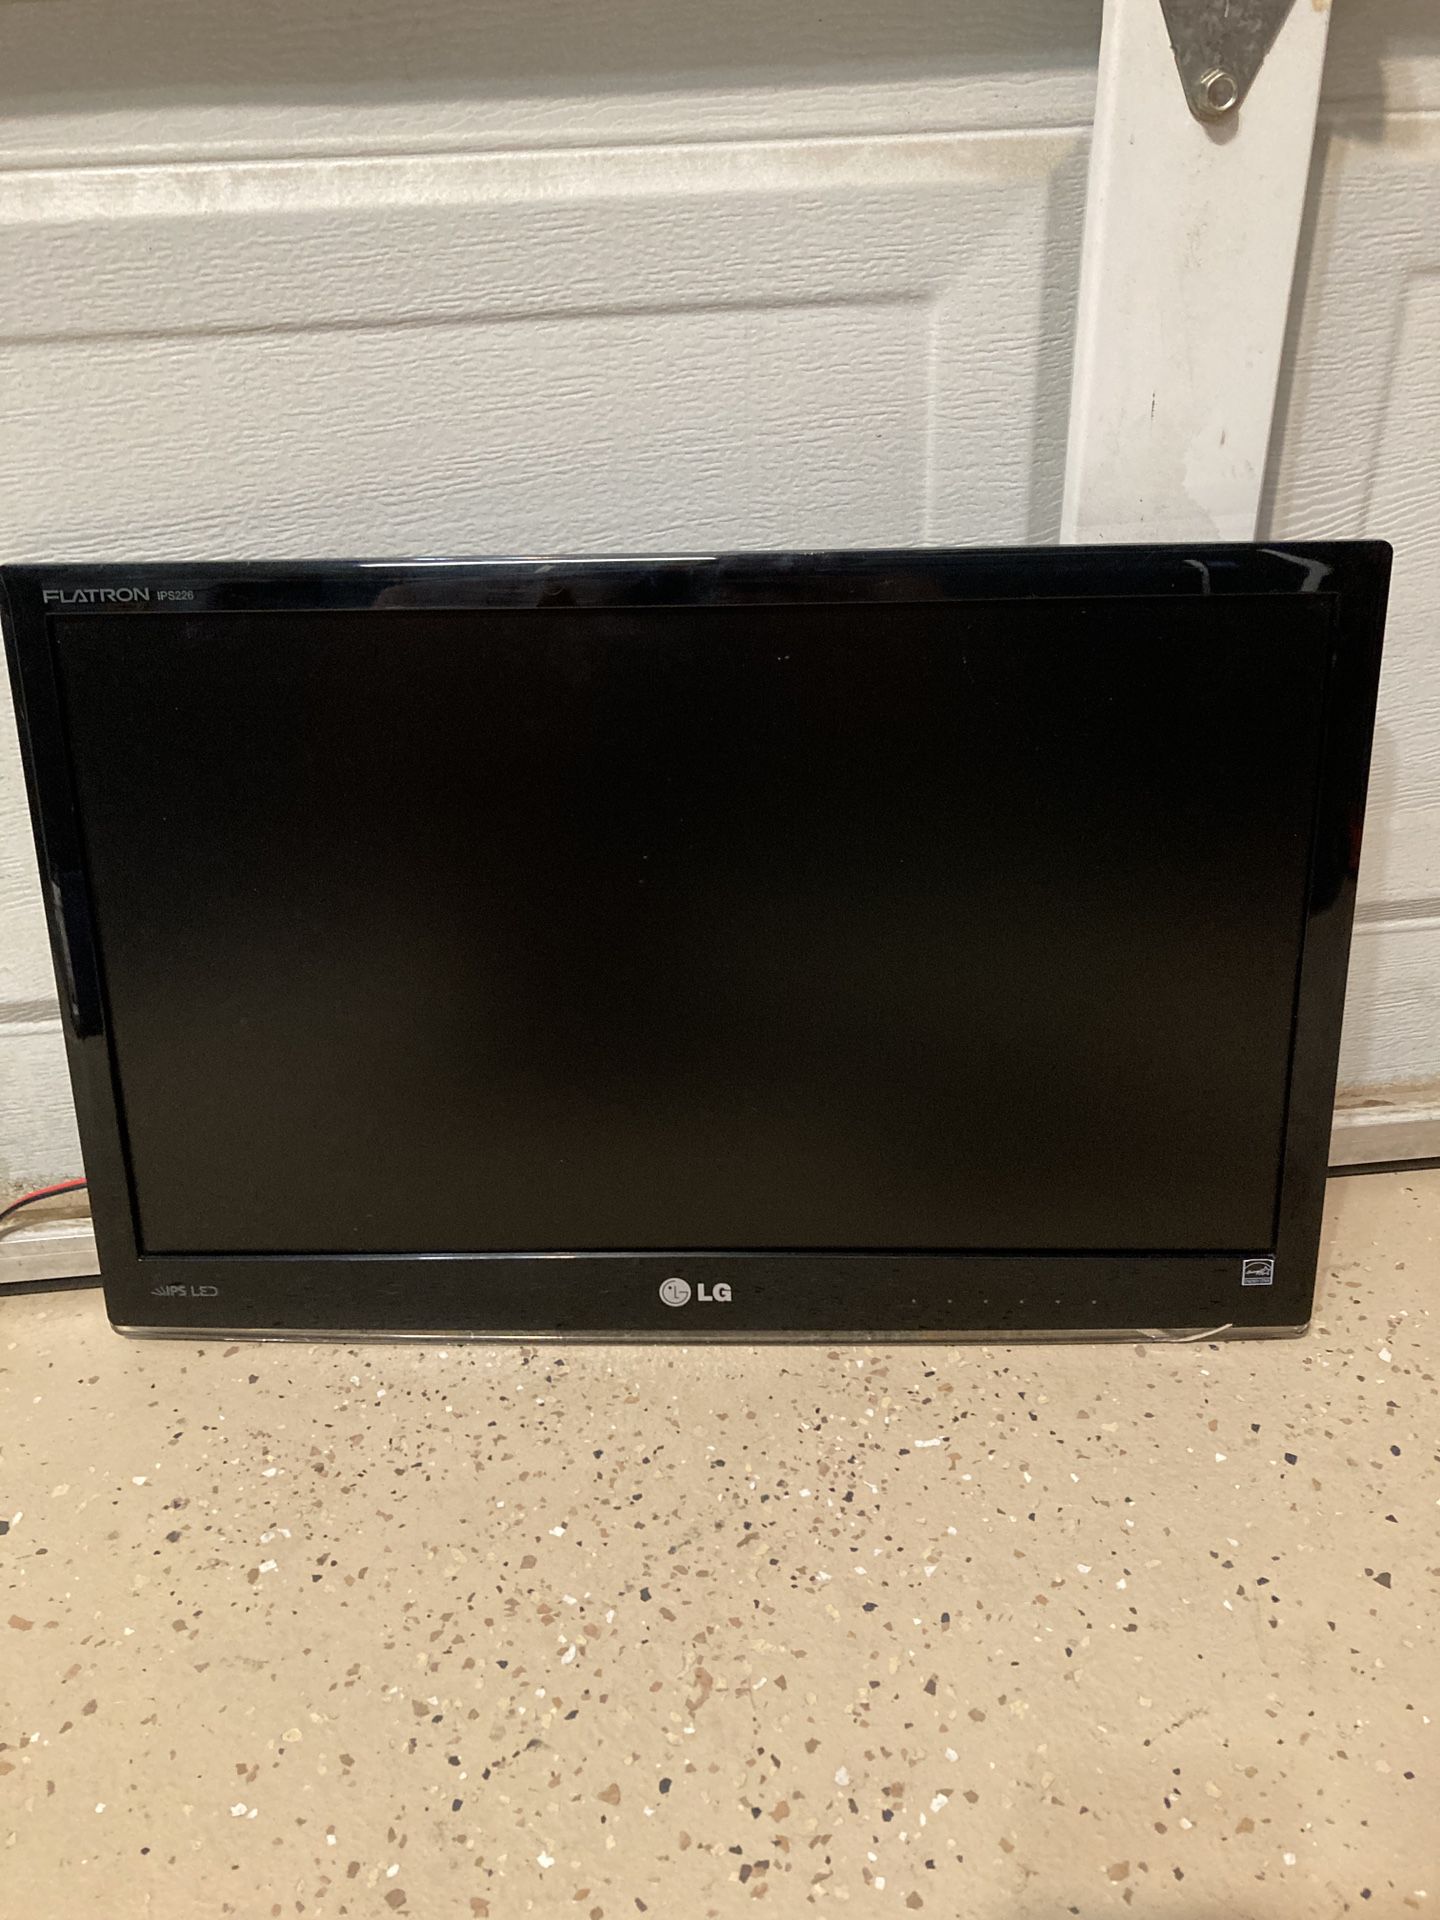 LG 22in HD Computer Monitor